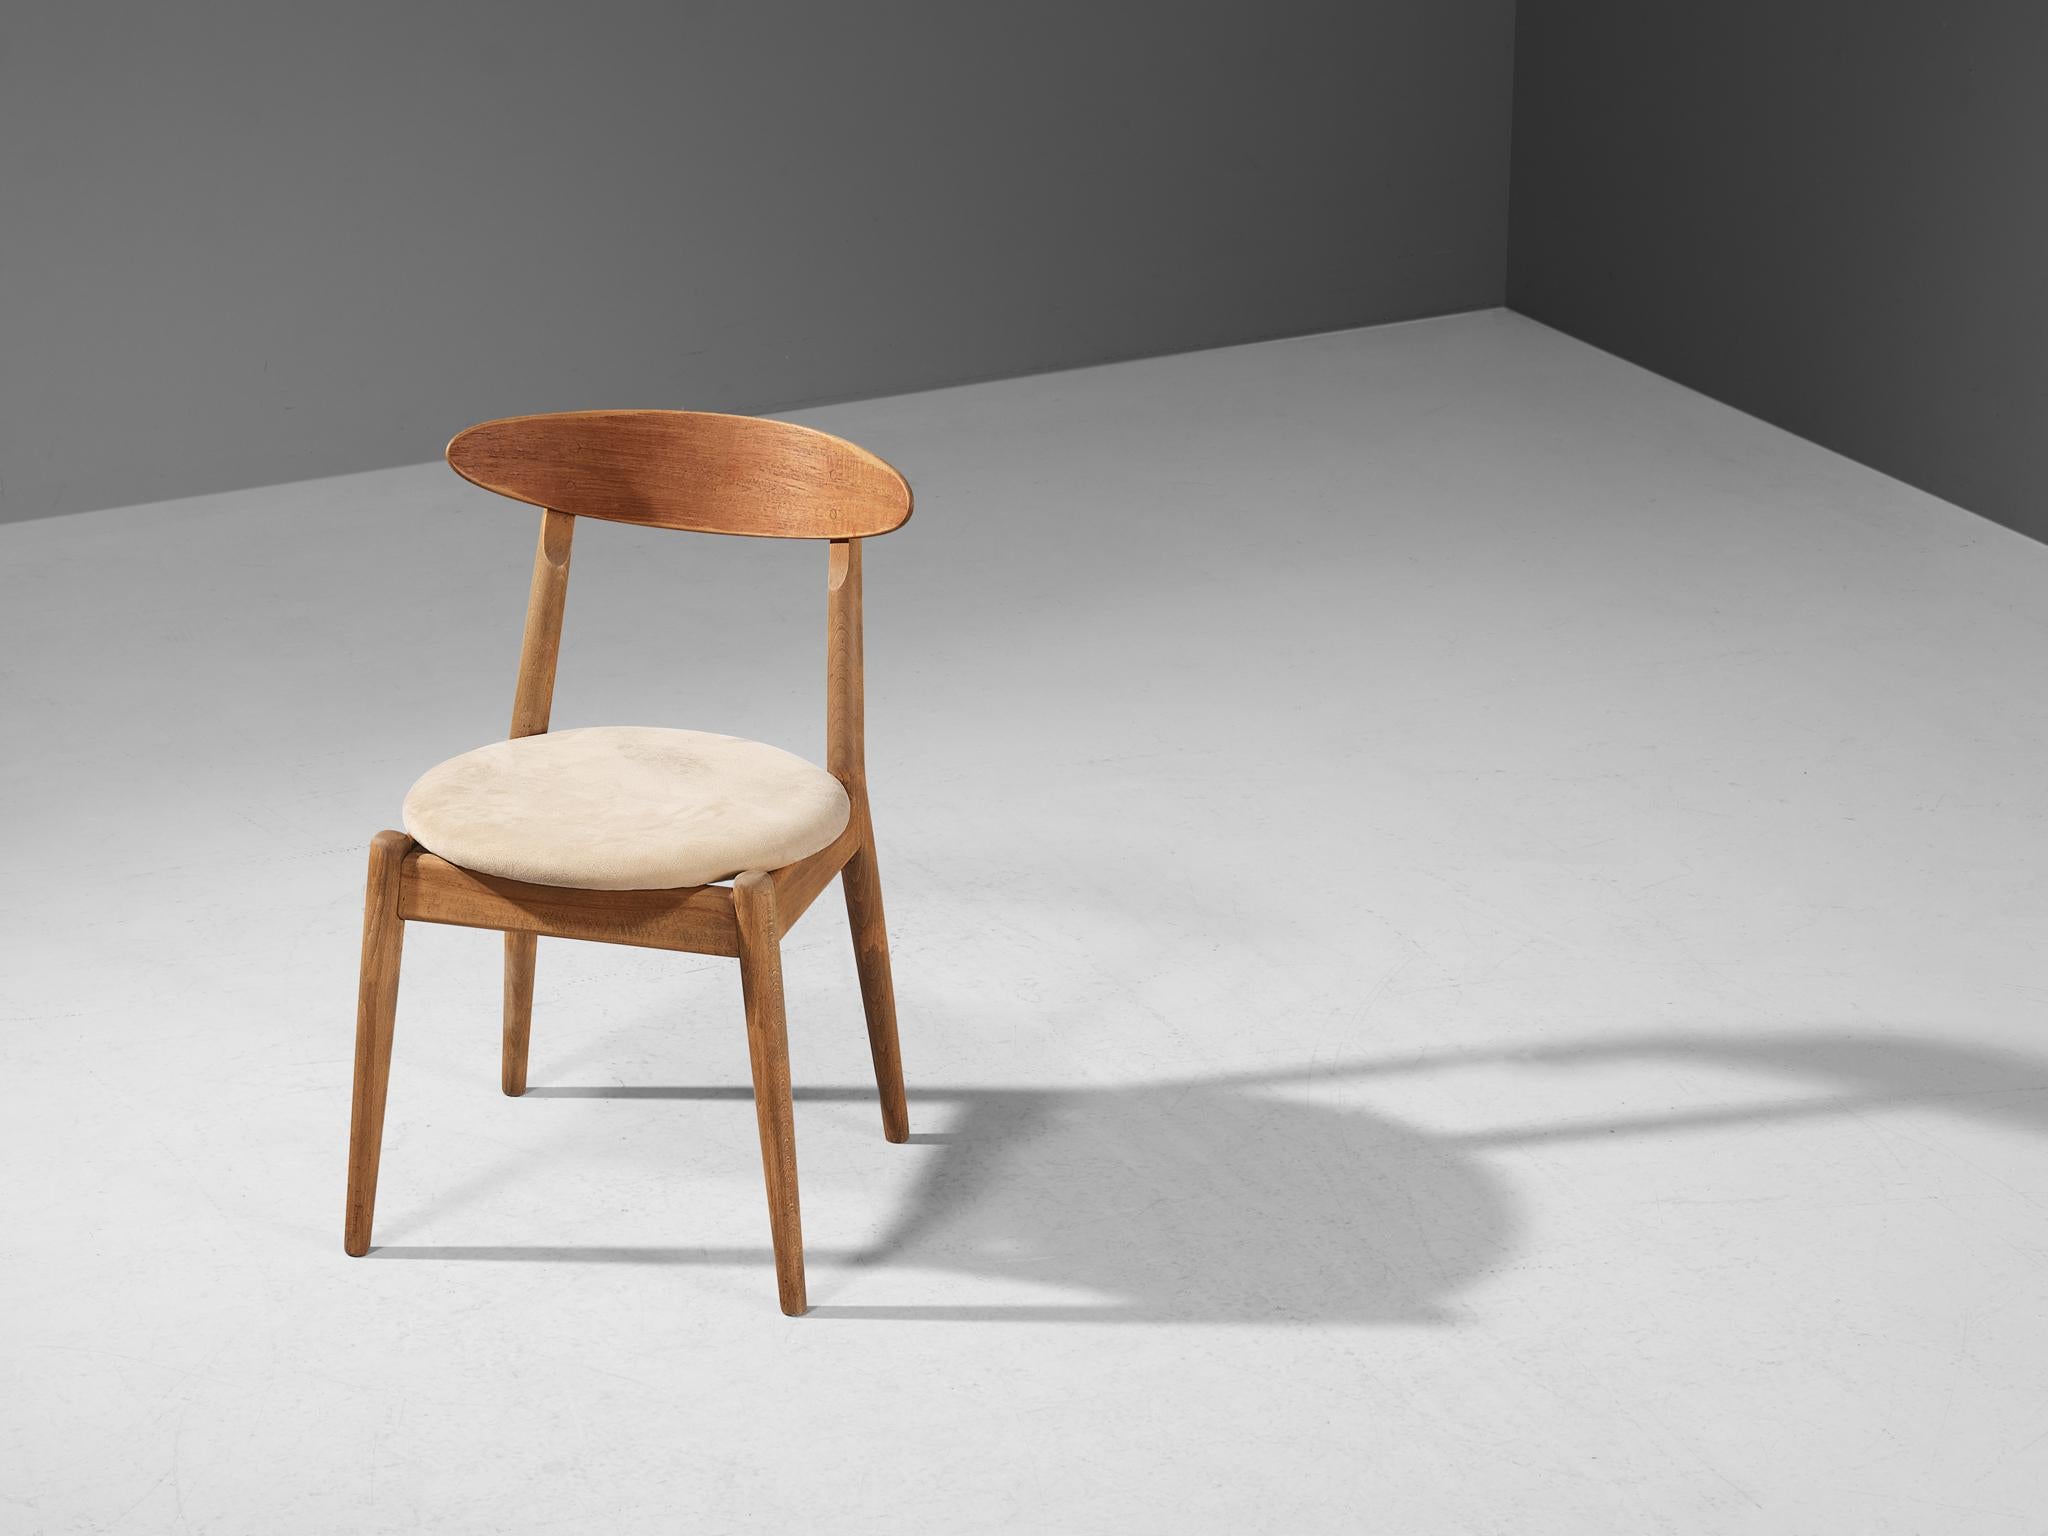 Jørgen Bo and Vilhelm Wohlert for P. Jeppesens Møbelfabrik, ‘Louisiana’ dining chair, oak, suede, Denmark, 1958.

The ‘Louisiana’ chair was initially created for the Louisiana Museum of Modern Art in Humlebæk (Denmark) which Danish